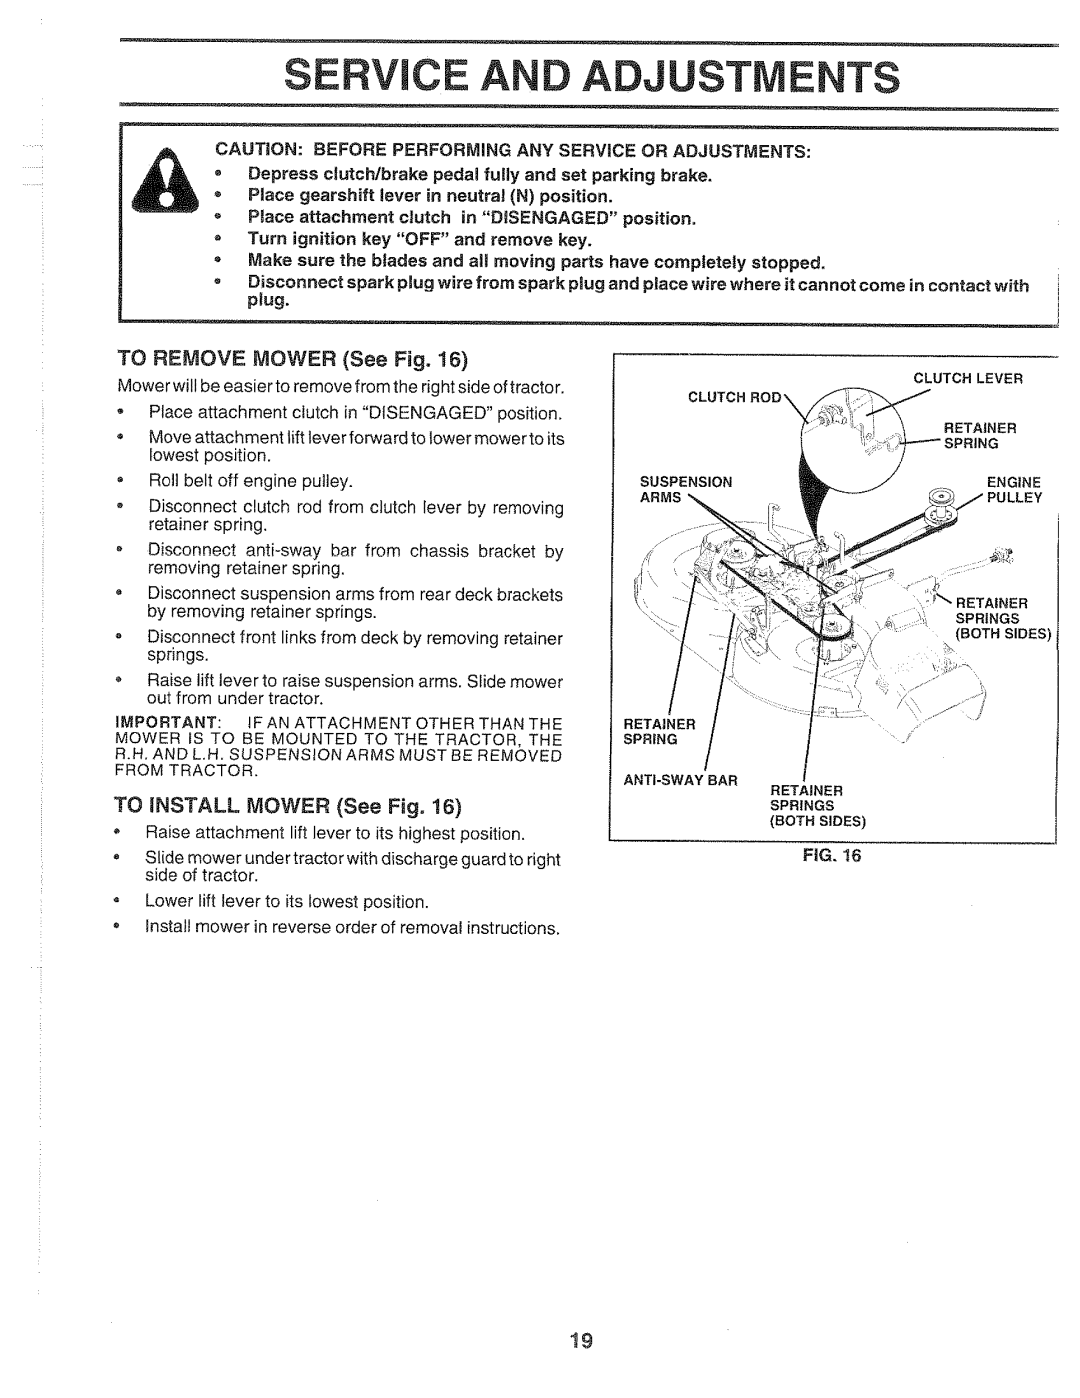 Sears 917.2565 manual Ervice A Adj Stments, TO REMOVE MOWER See Fig, TO iNSTALL MOWER See Fig, FiG 